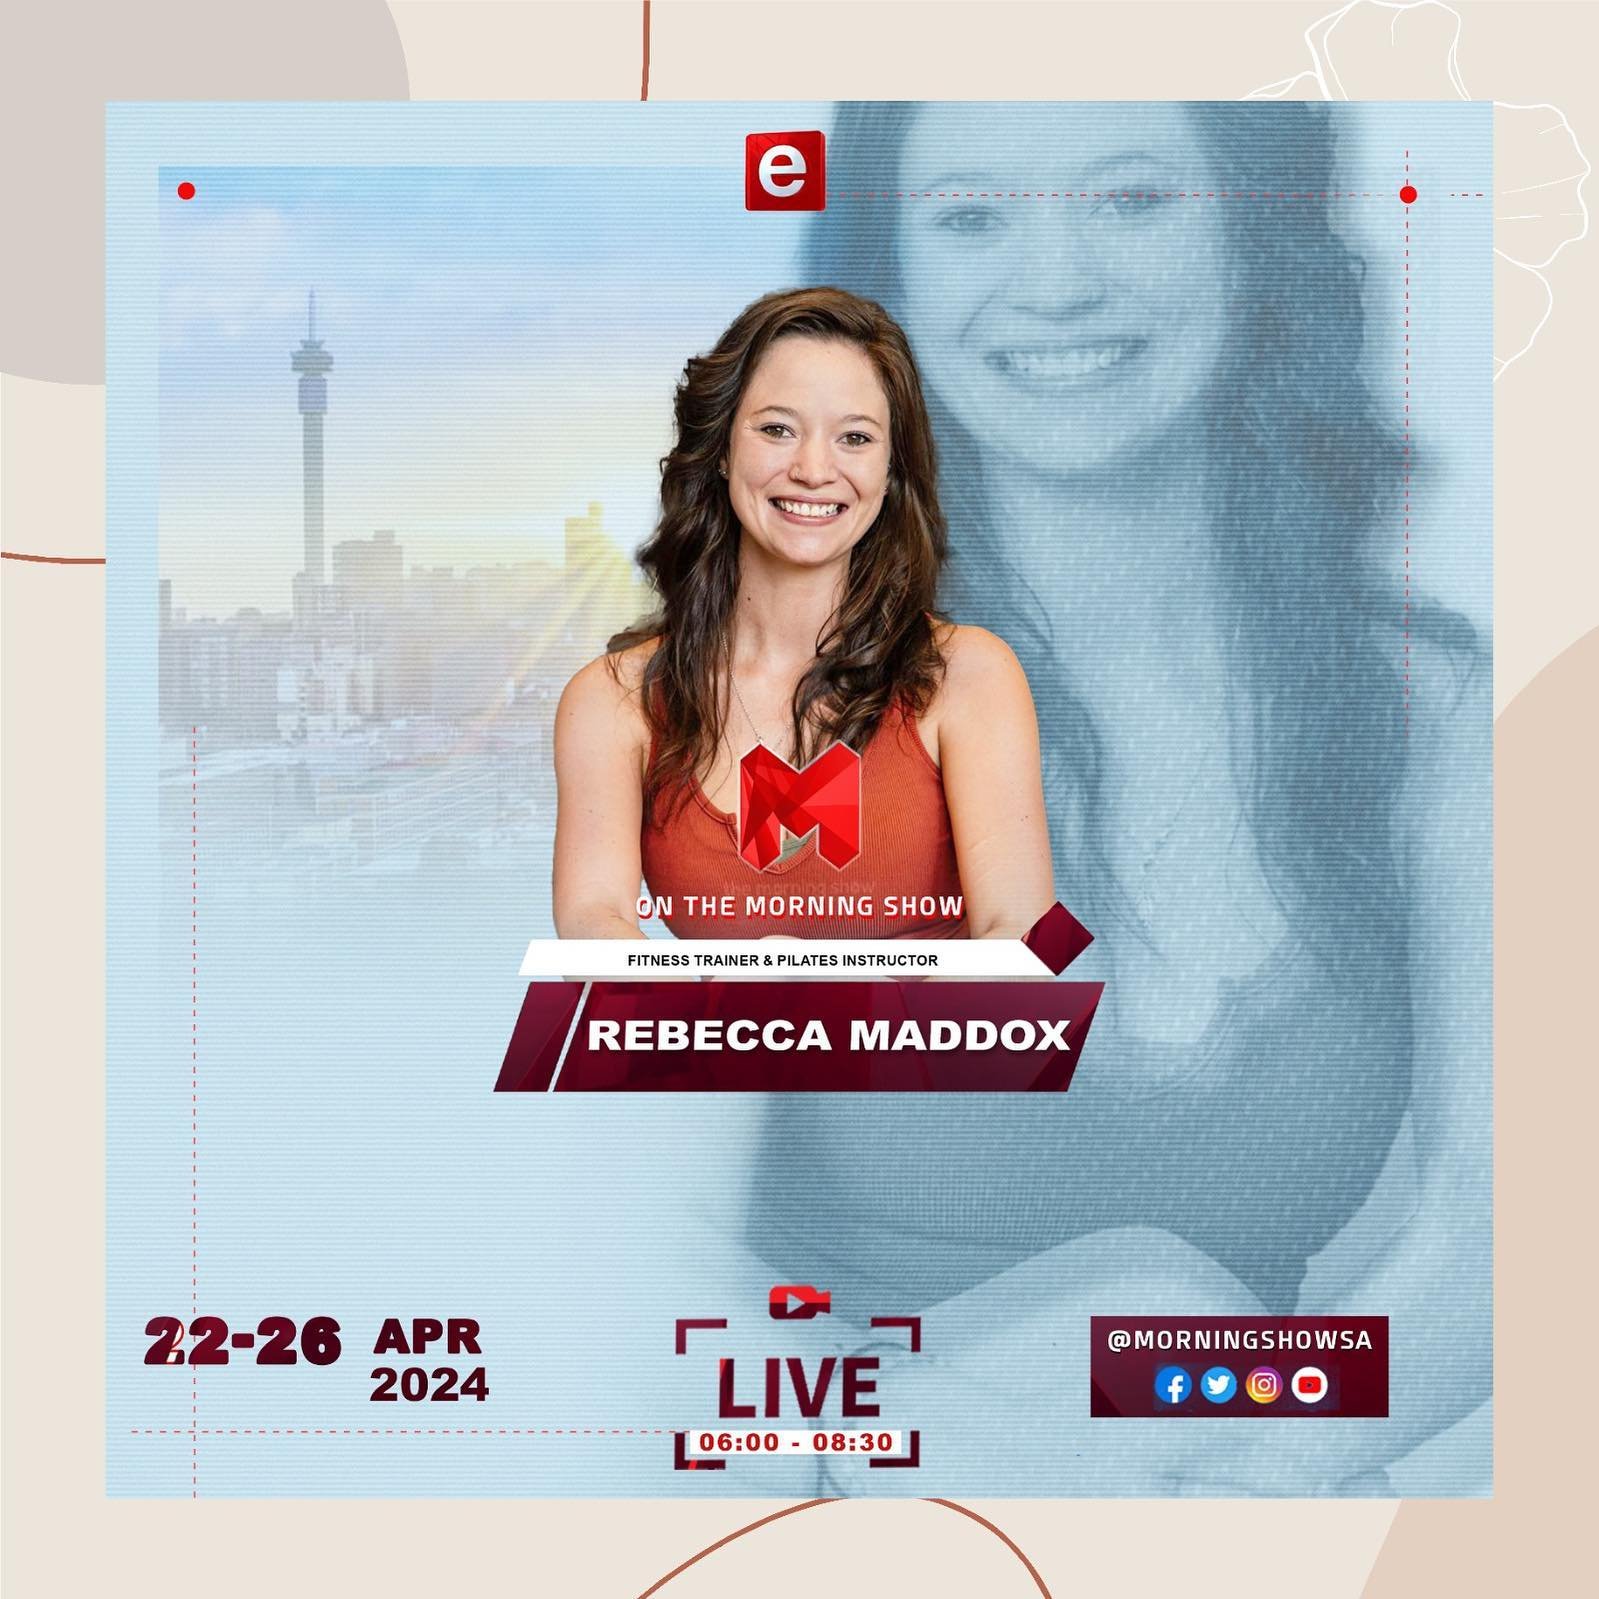 Catch fitness trainer &amp; pilates instructor, Rebecca Maddox on The Morning Live show, channel 194 on Dstv 

#cocopilates#liveonDst#morninglive#pilates#